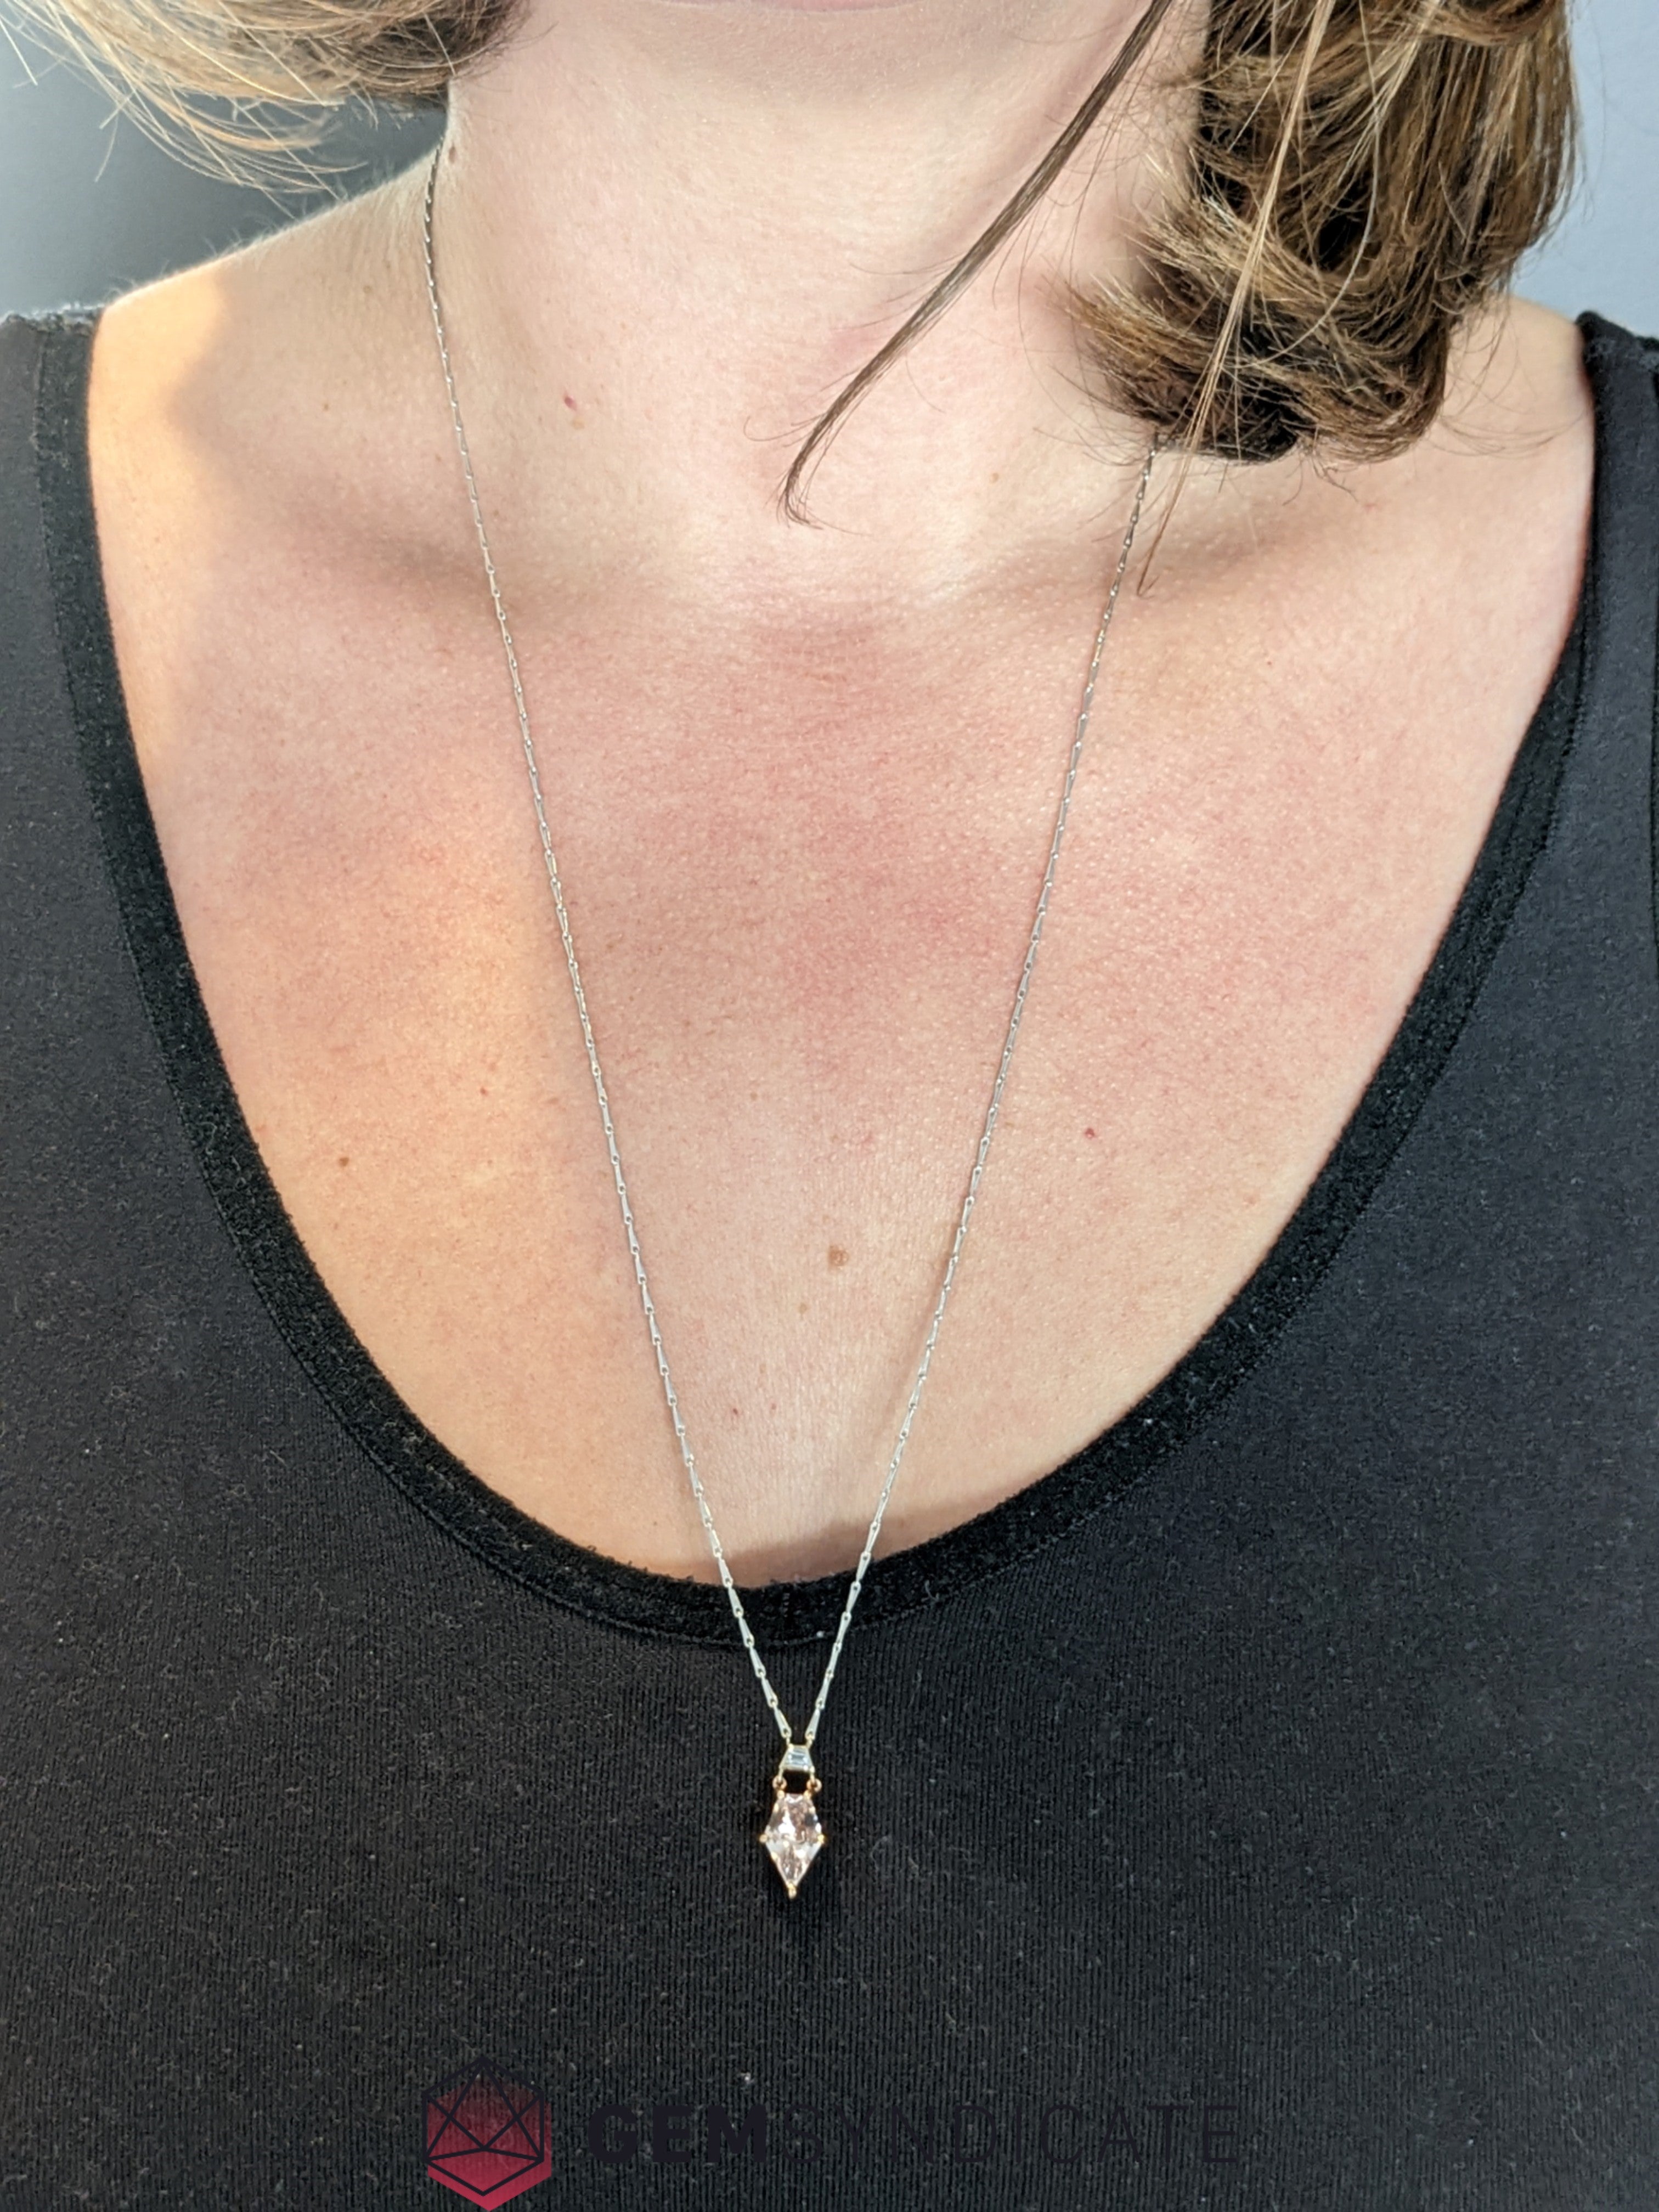 Fierce Peach Sapphire Necklace in 14k White and Rose Gold